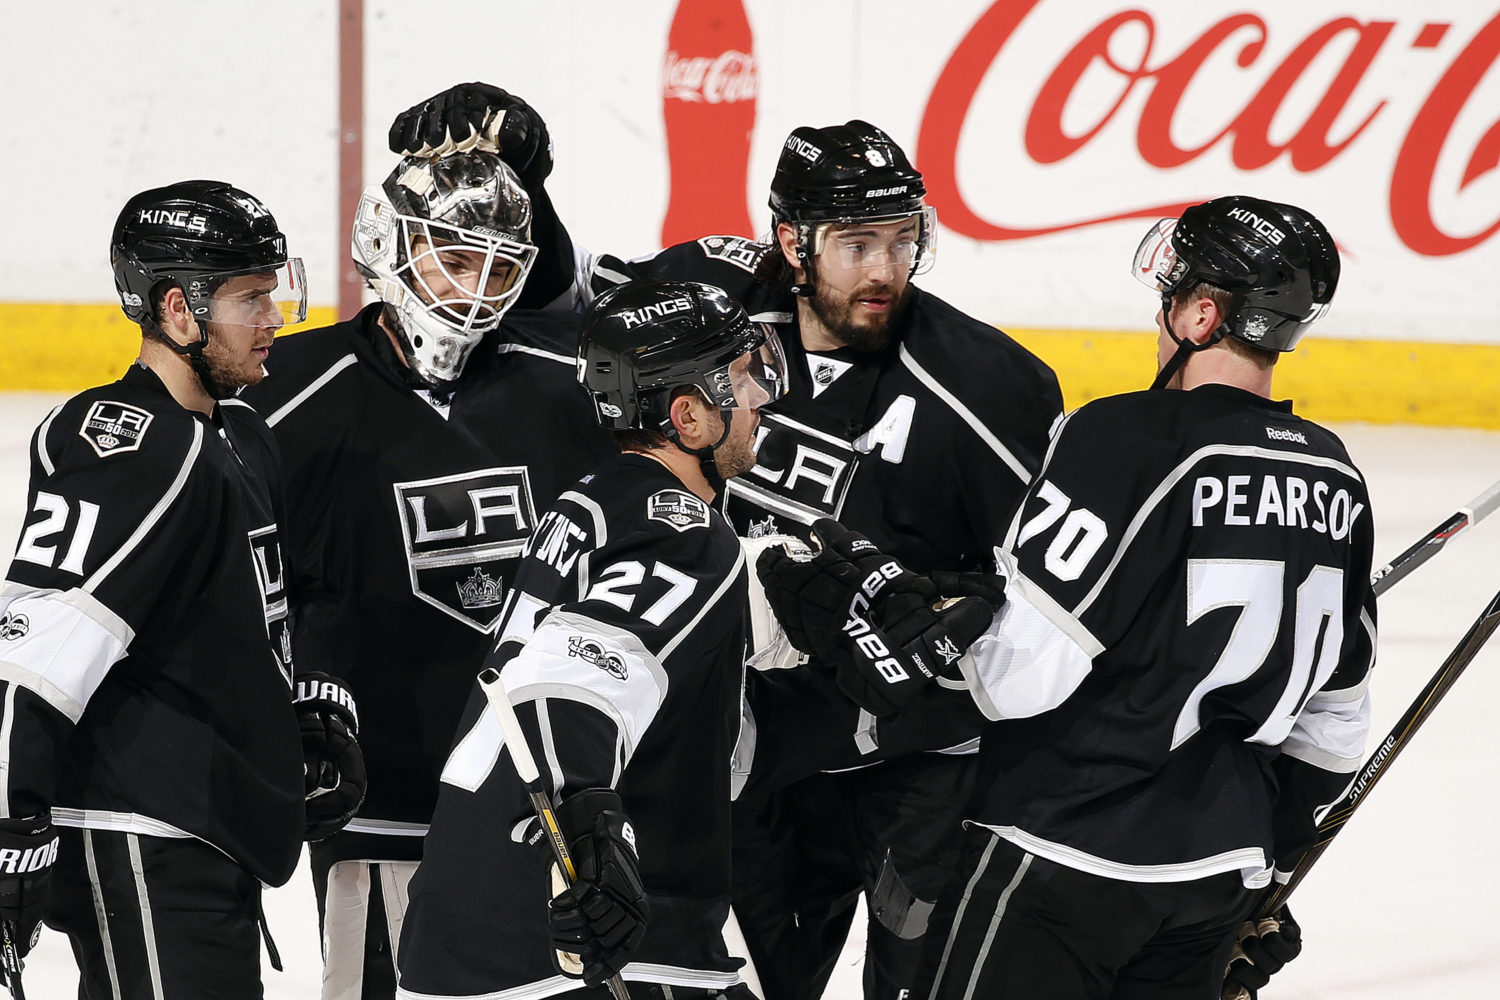 LA Kings: The case for Jeff Carter's number to be retired